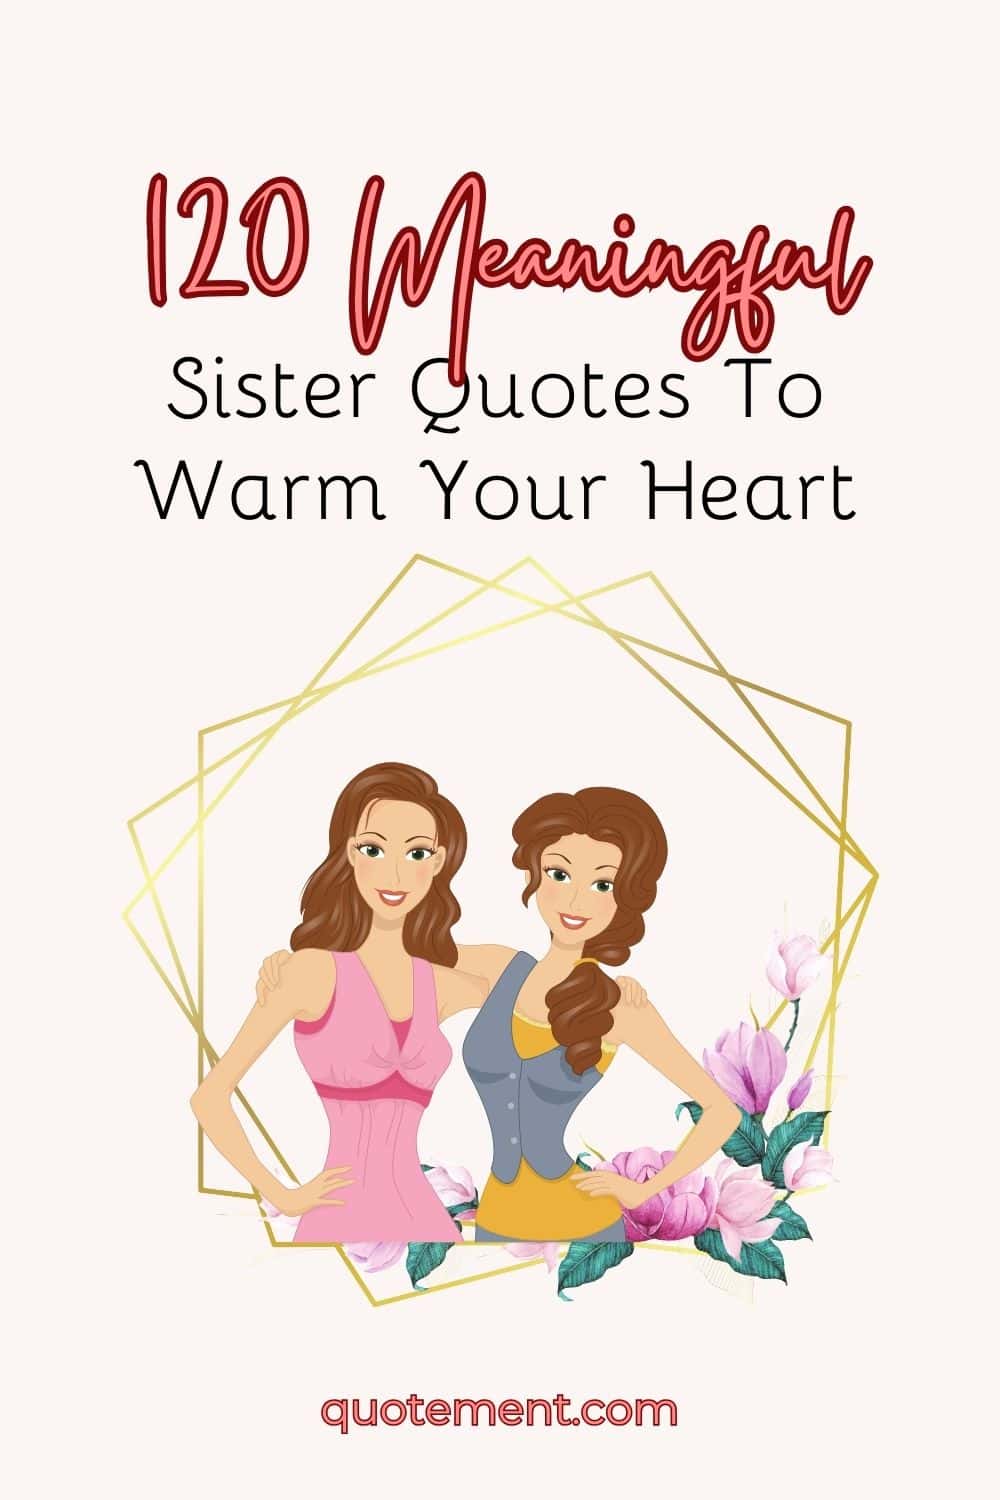 120 Meaningful Sister Quotes That'll Make You Smile & Cry

